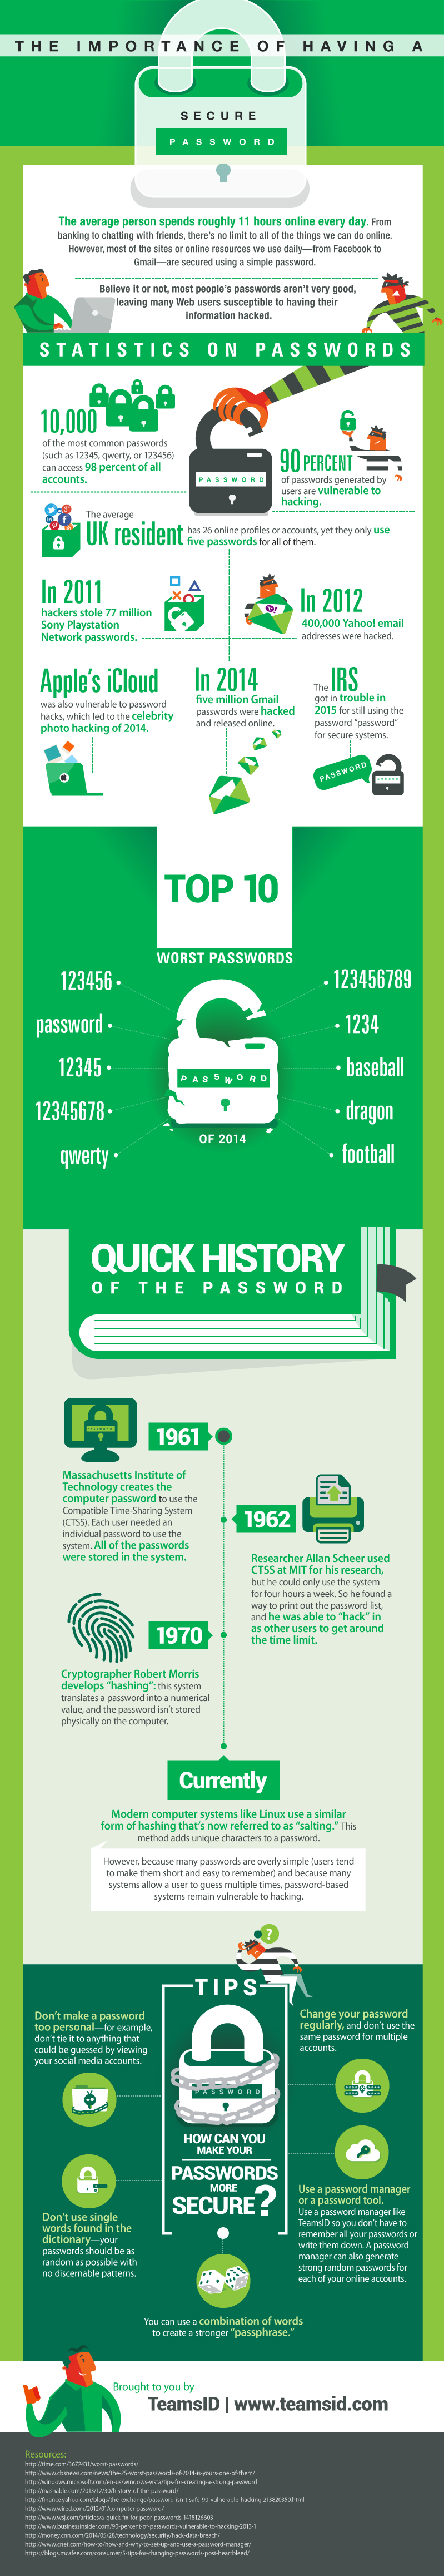  Importance of having a secure password infographic